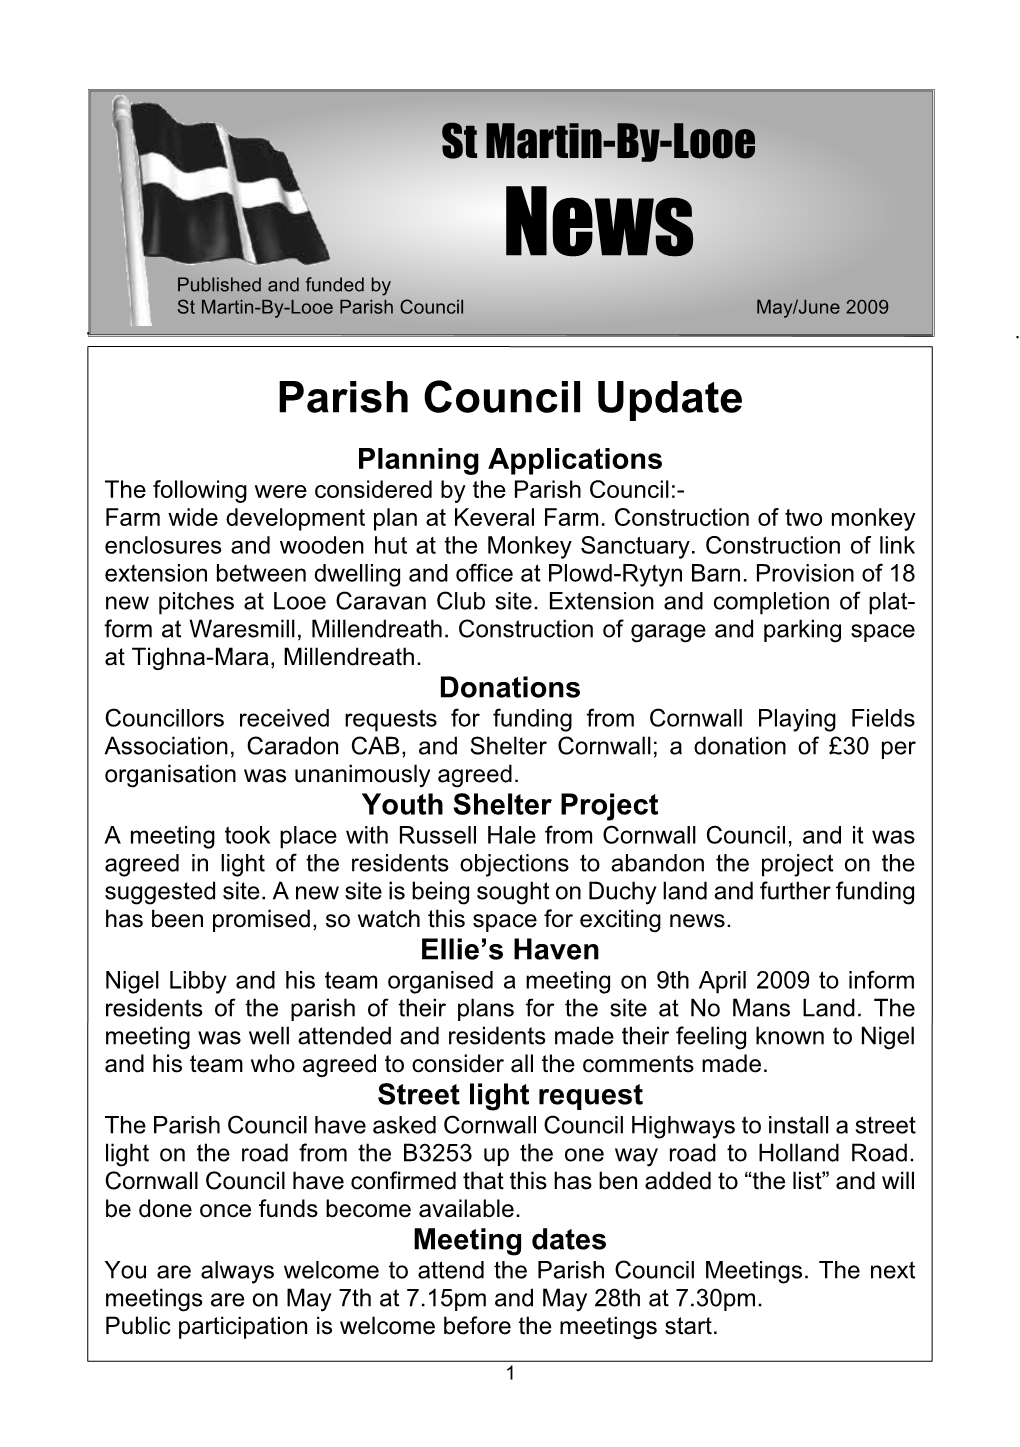 St Martin-By-Looe News Published and Funded by St Martin-By-Looe Parish Council May/June 2009